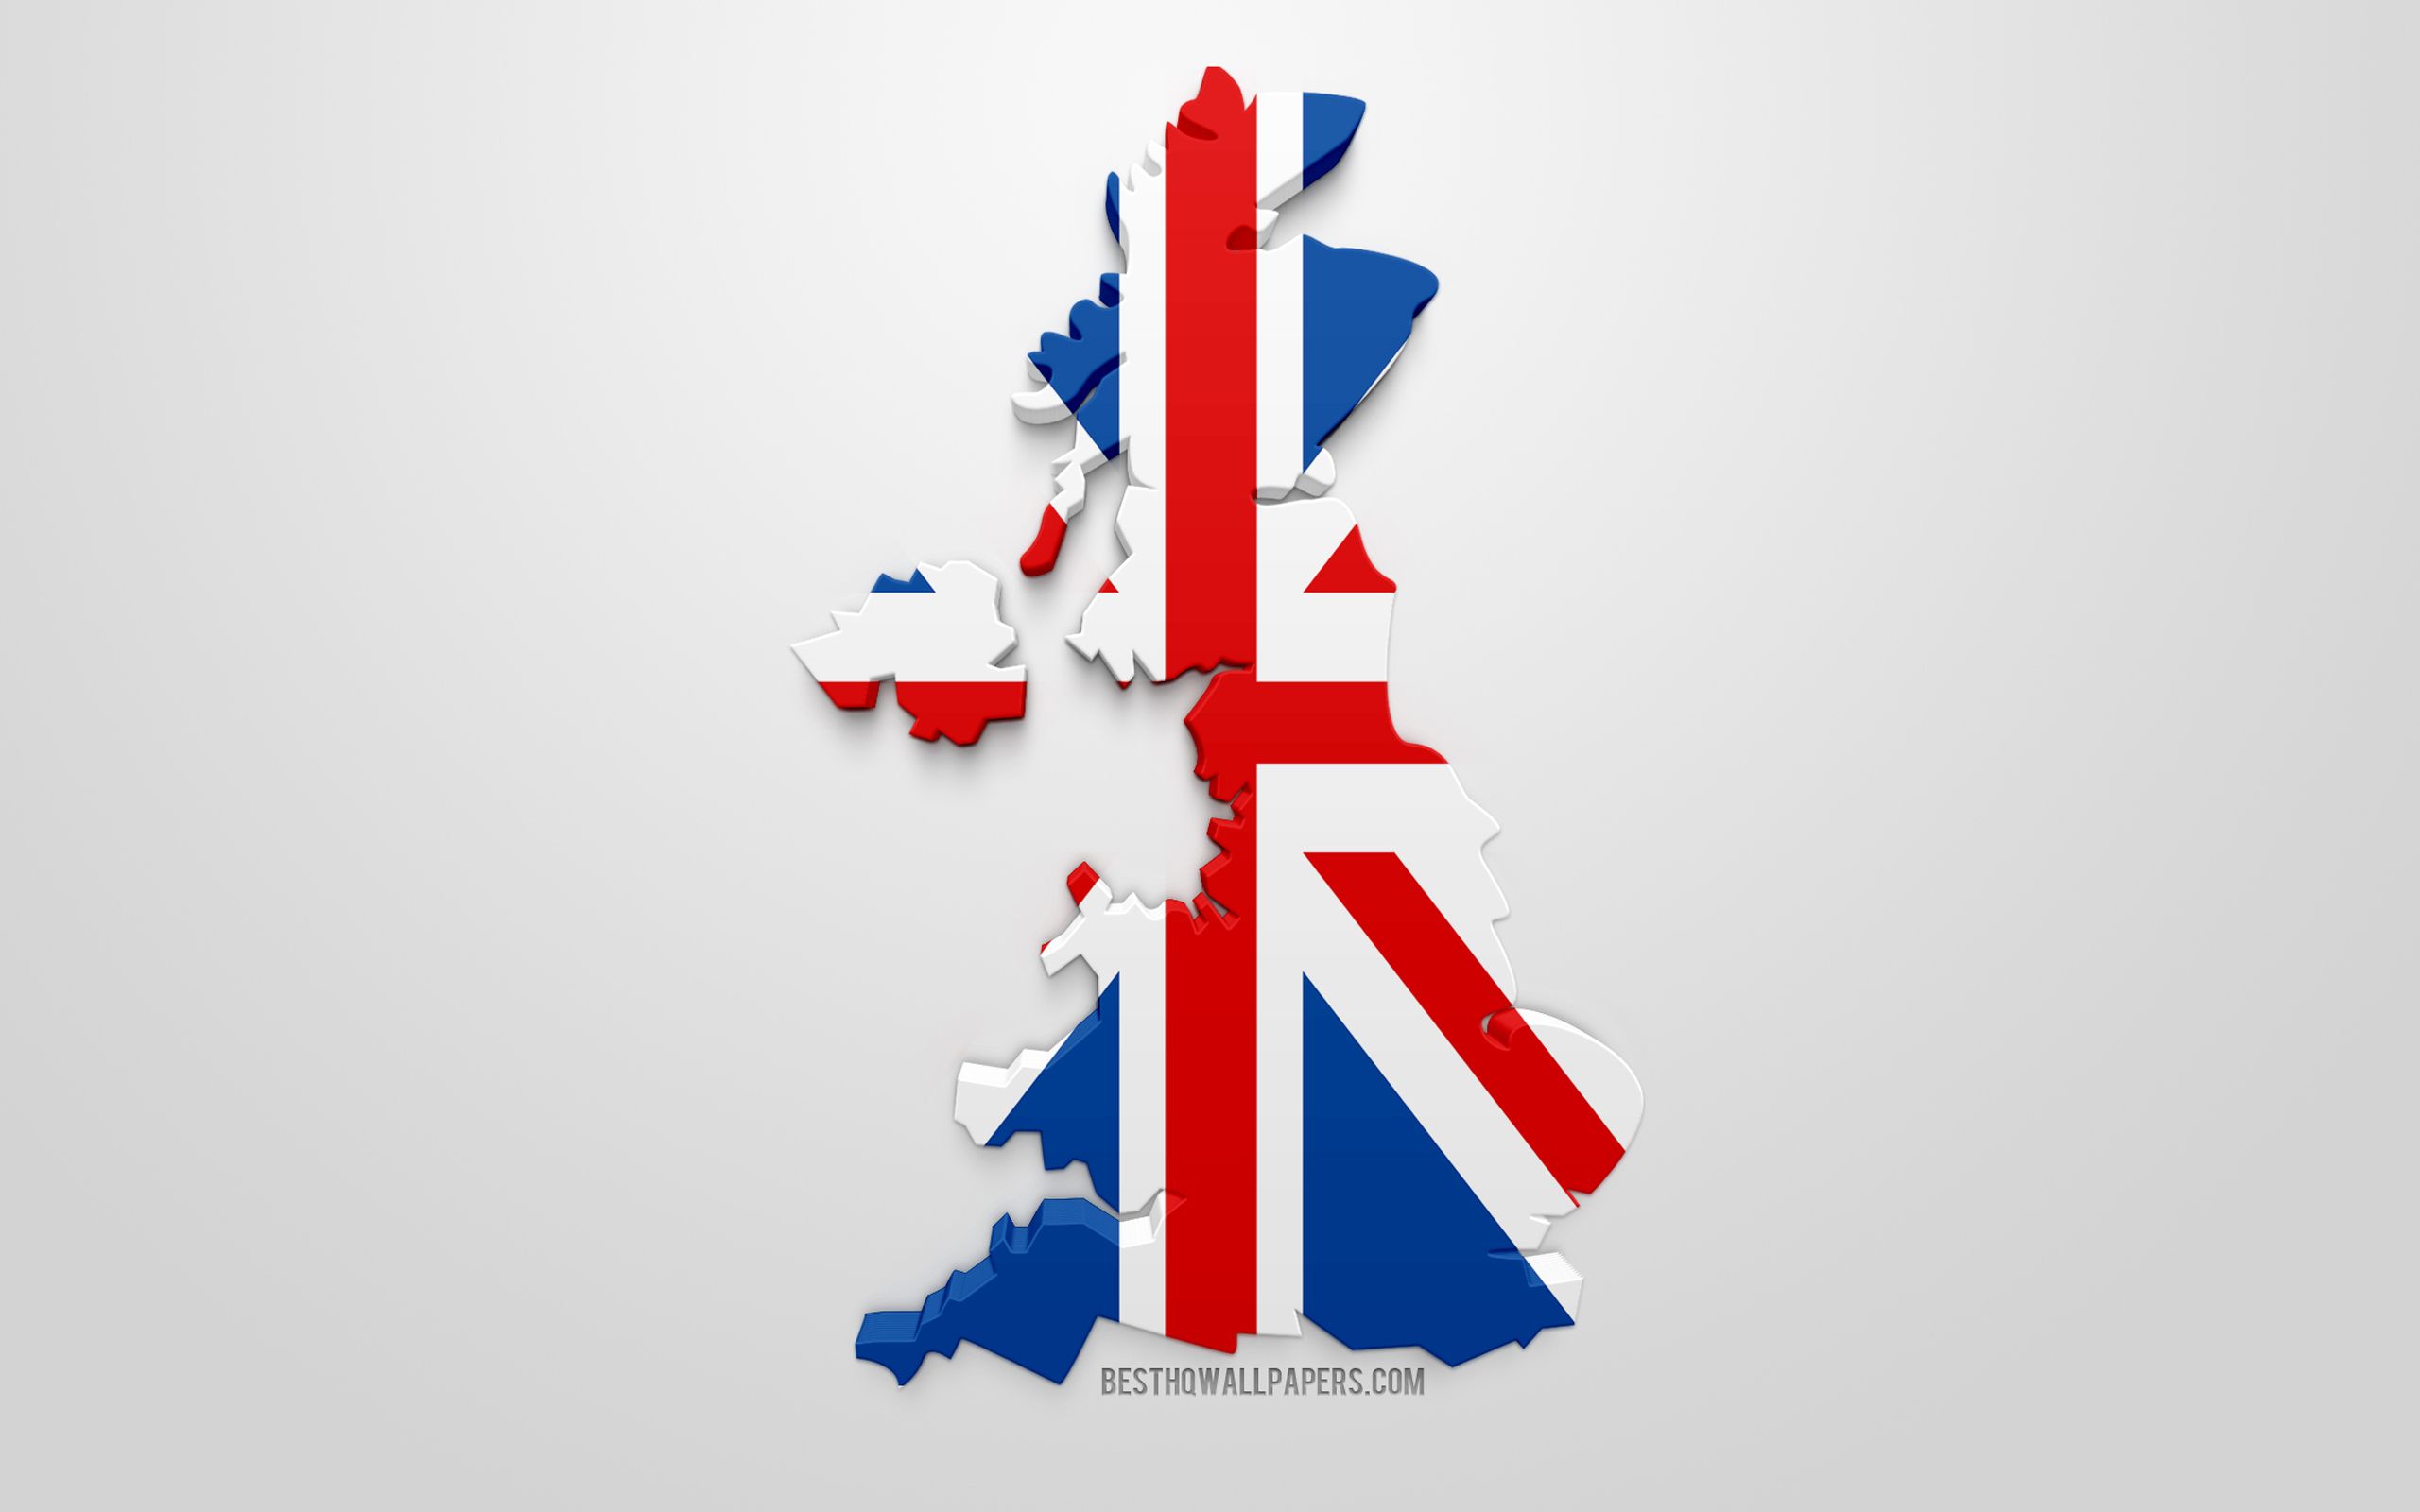 Download wallpaper 3D flag of United Kingdom, silhouette map of United Kingdom, 3D art, UK flag, Great Britain, Europe, Sweden, geography, Sweden 3D silhouette for desktop with resolution 2560x1600. High Quality HD